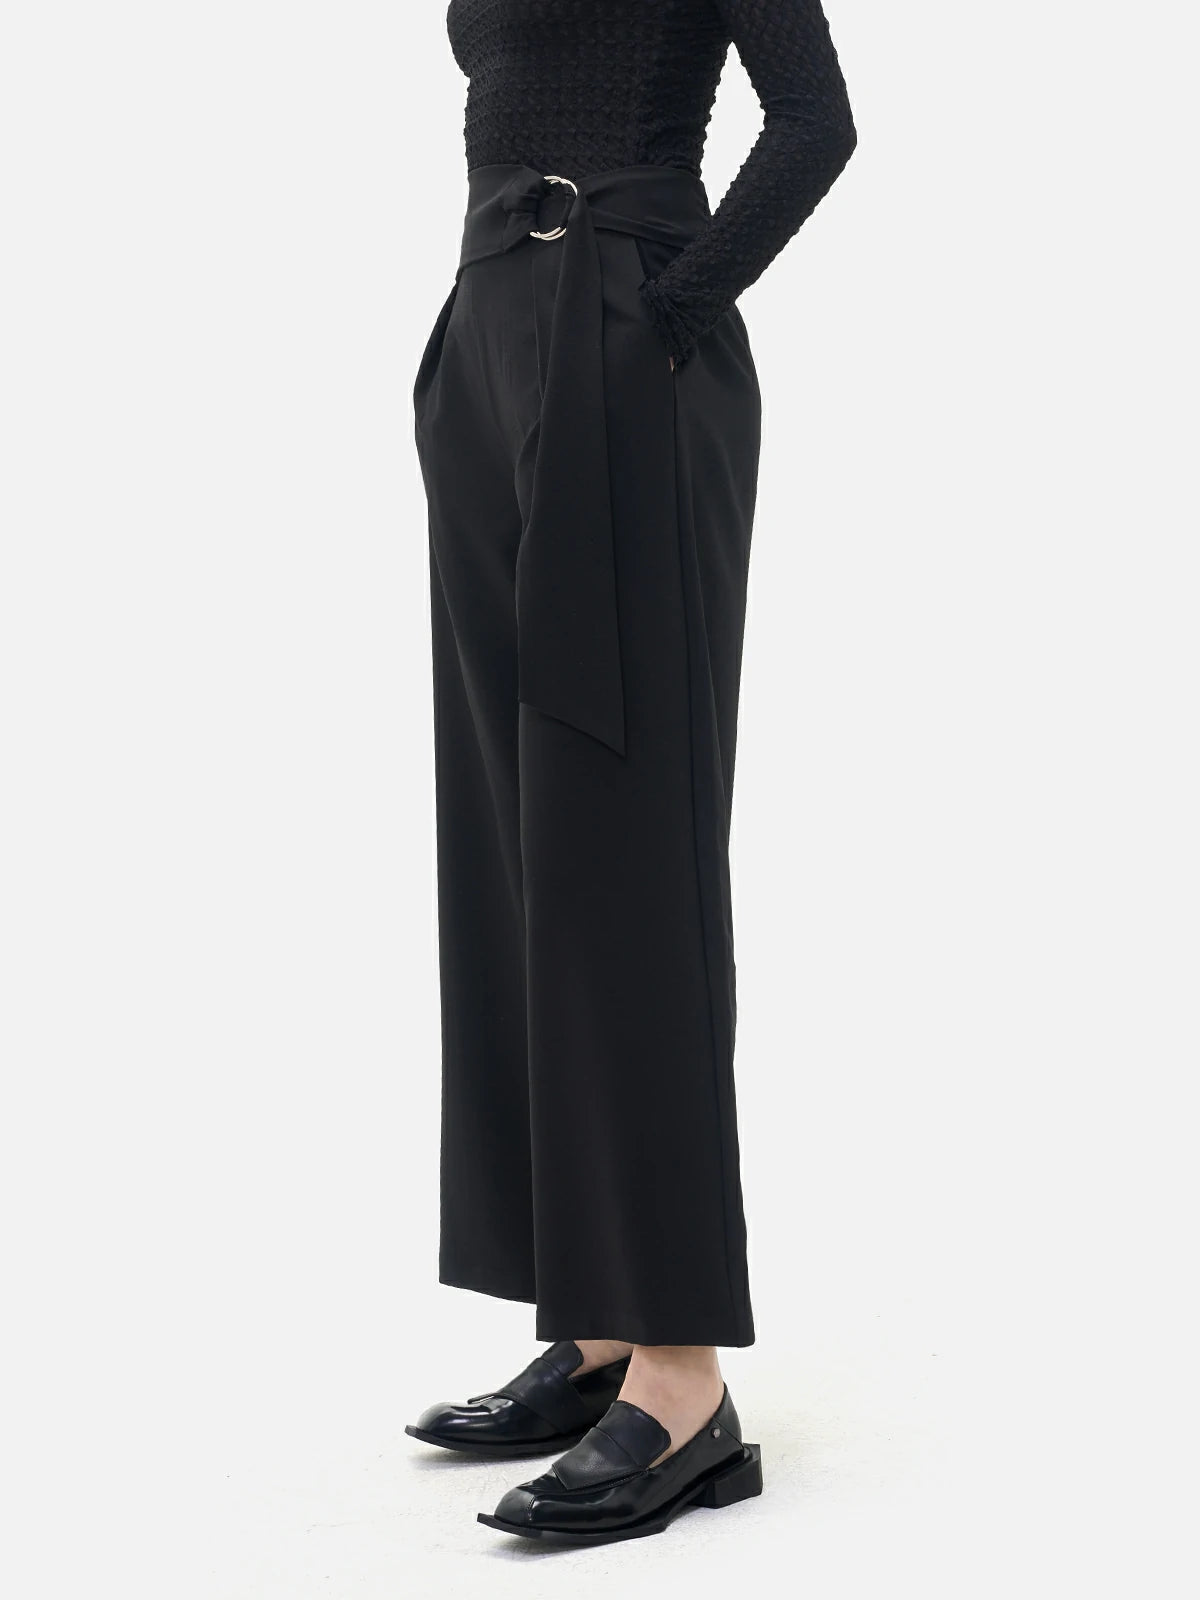 Stylish black wide-leg trousers with belt for women